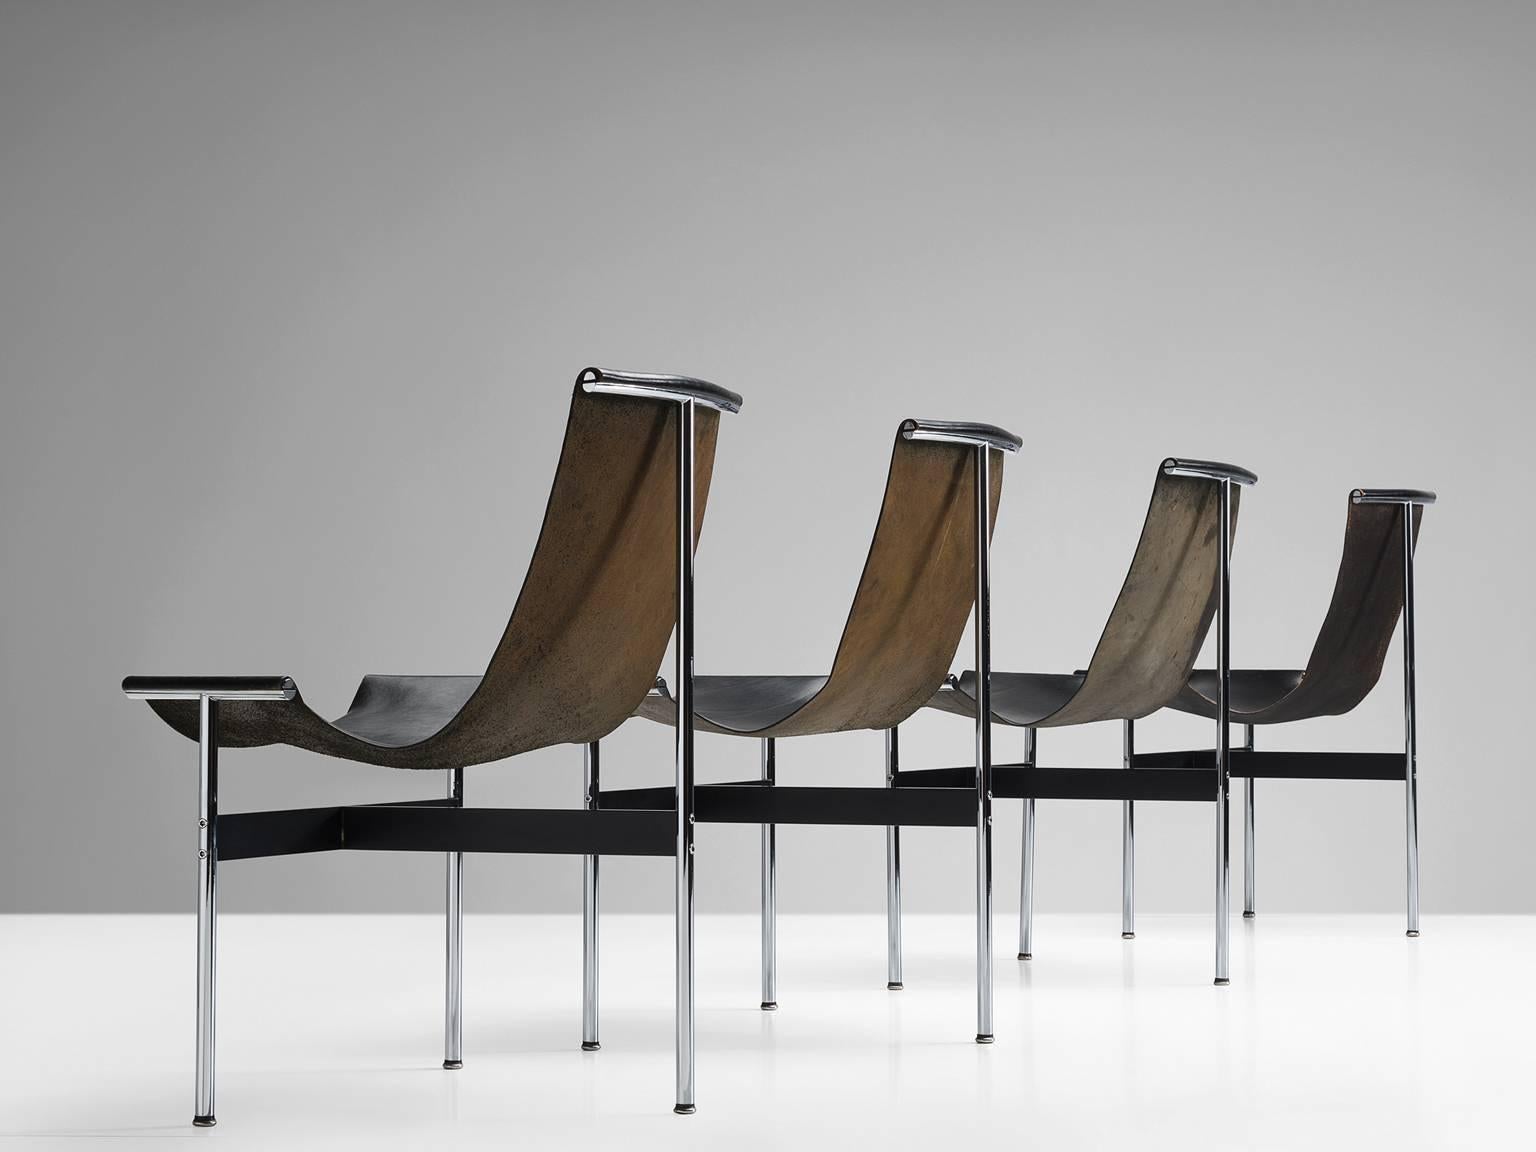 Katavolos, Kelley and Littell, chair, chrome-plated steel, enameled steel and black leather, United States, 1952.

This set of elegant and playful three-legged chairs seems almost too delicate to sit in. But in fact these sensuous chairs are very